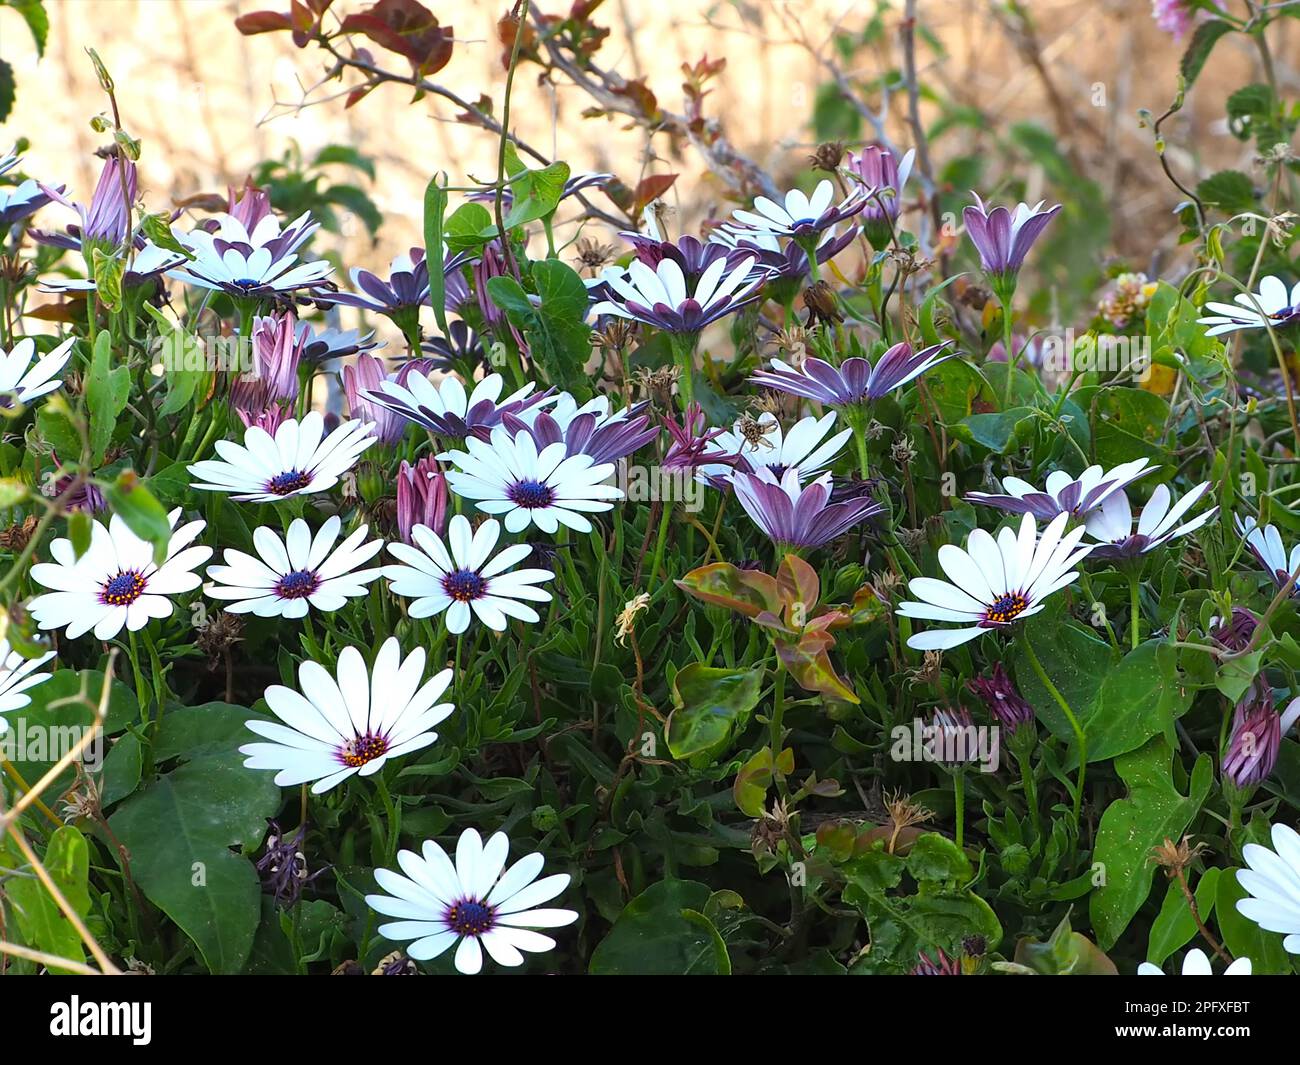 Dimorphotheca ecklonis, also known as Cape marguerite and African daisy. Stock Photo